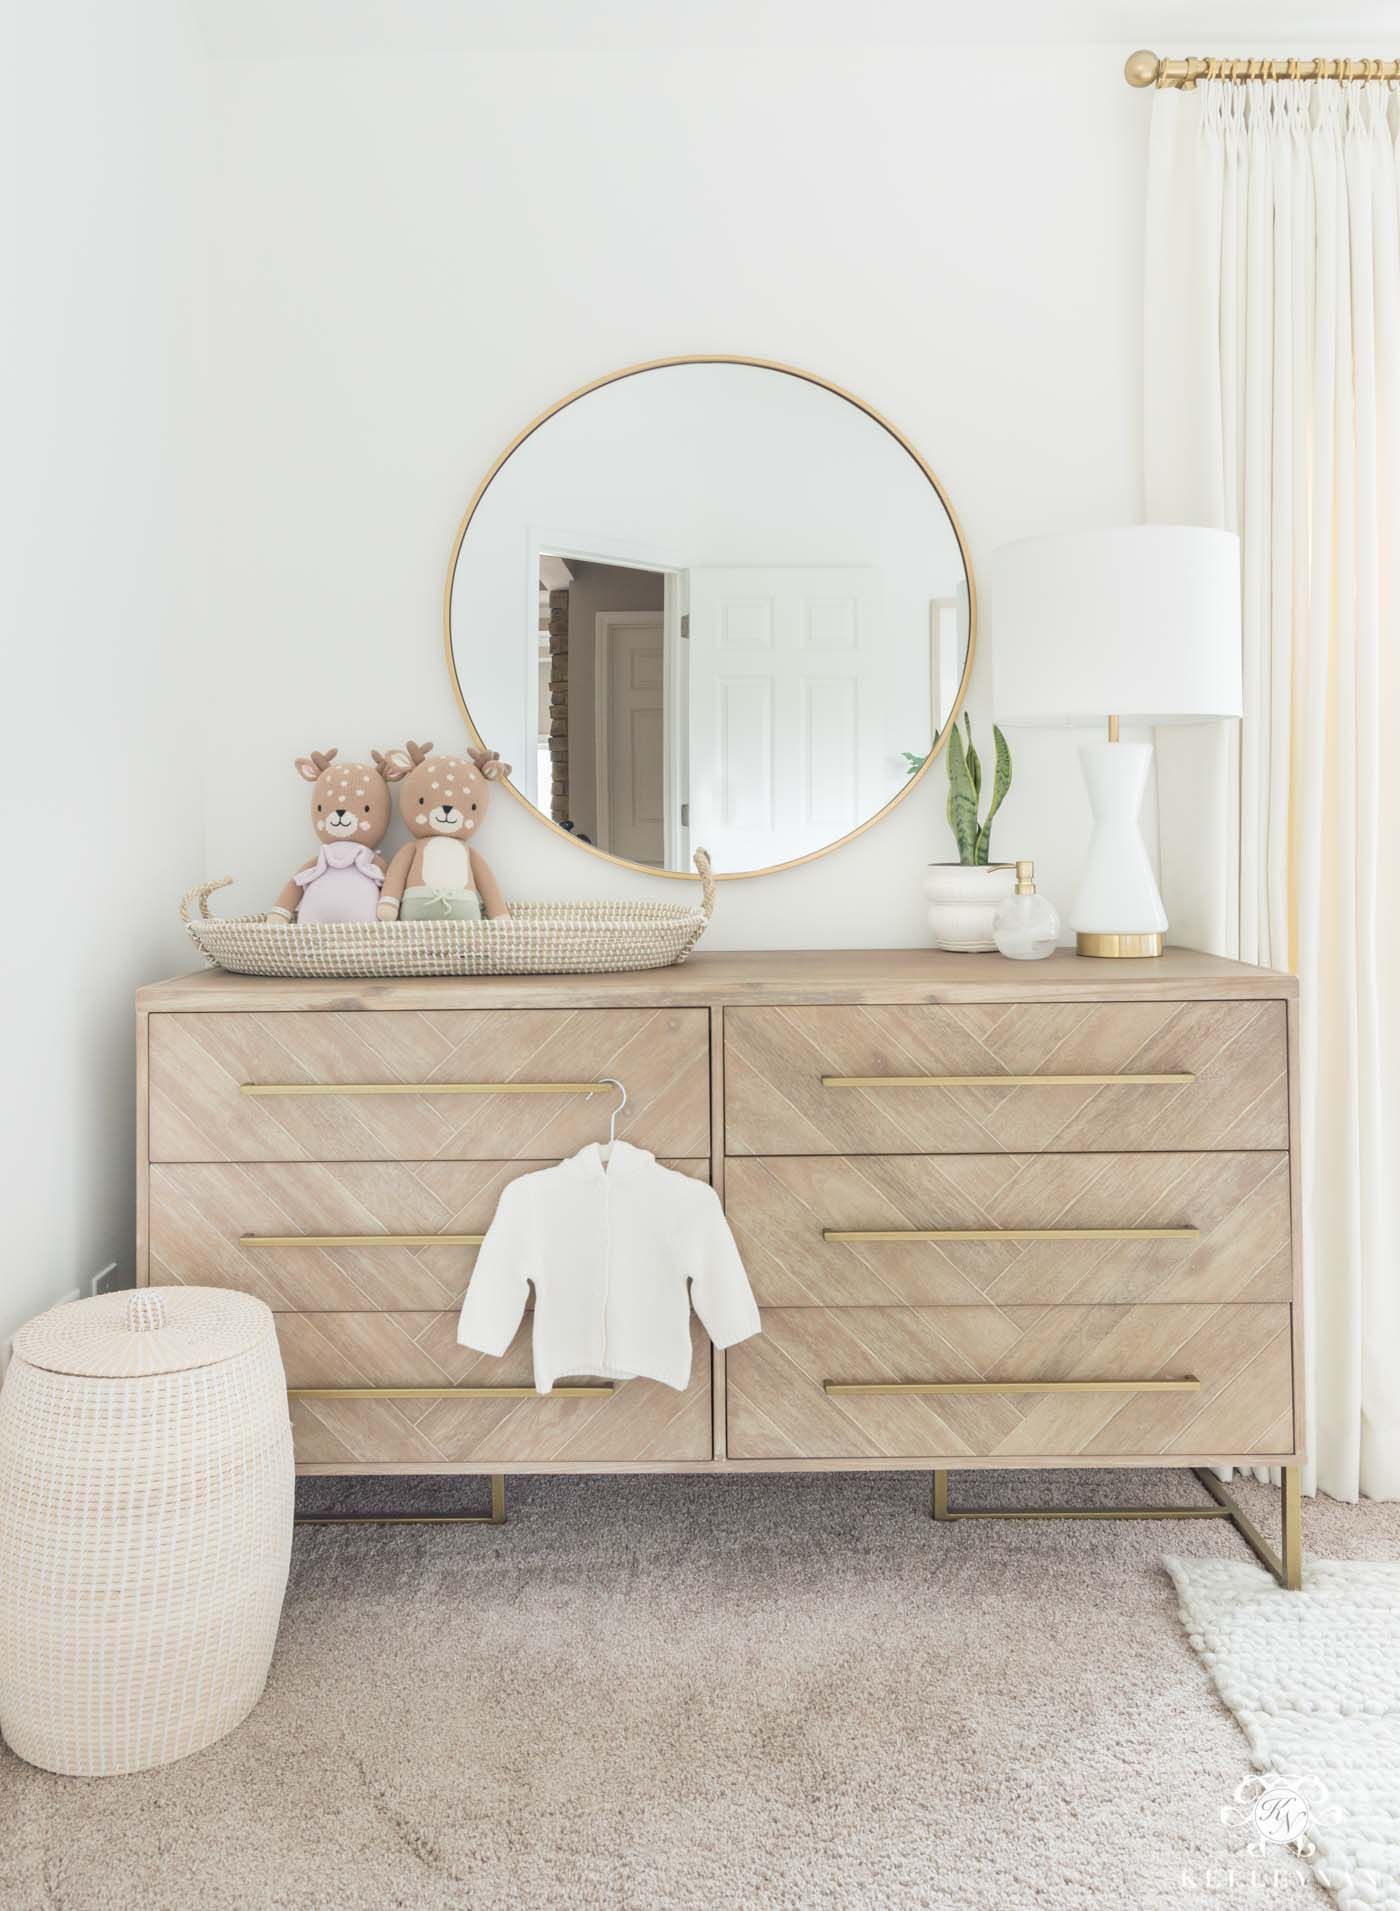 Complete your baby room look with baby
  dresser